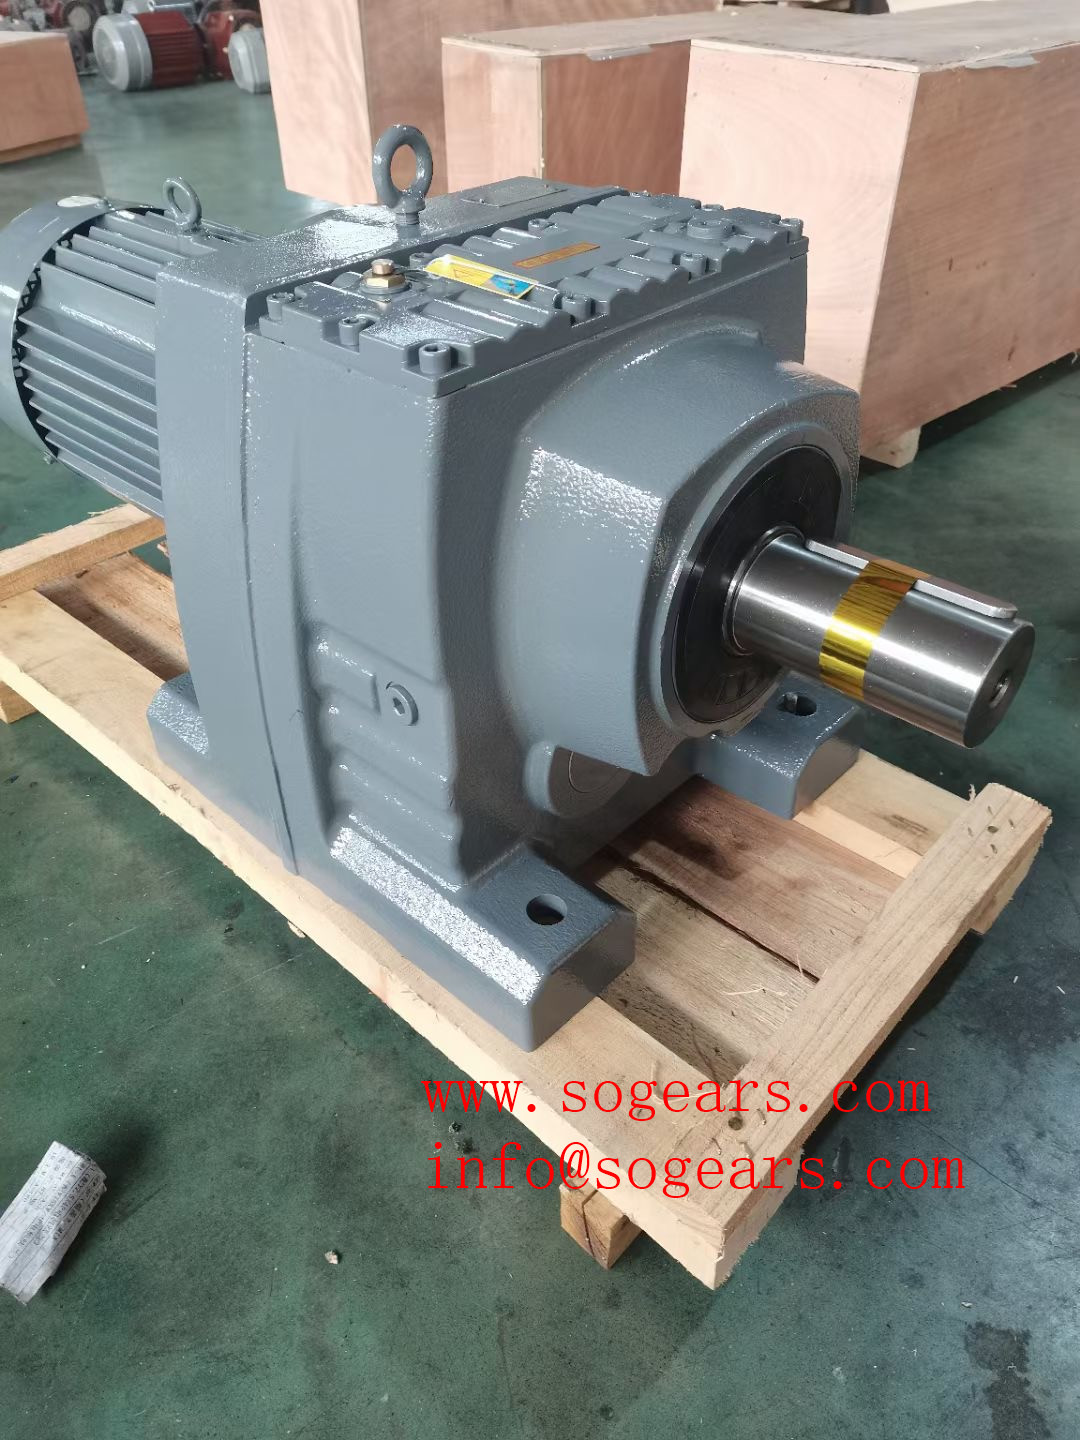 The specifications of synchronous motor